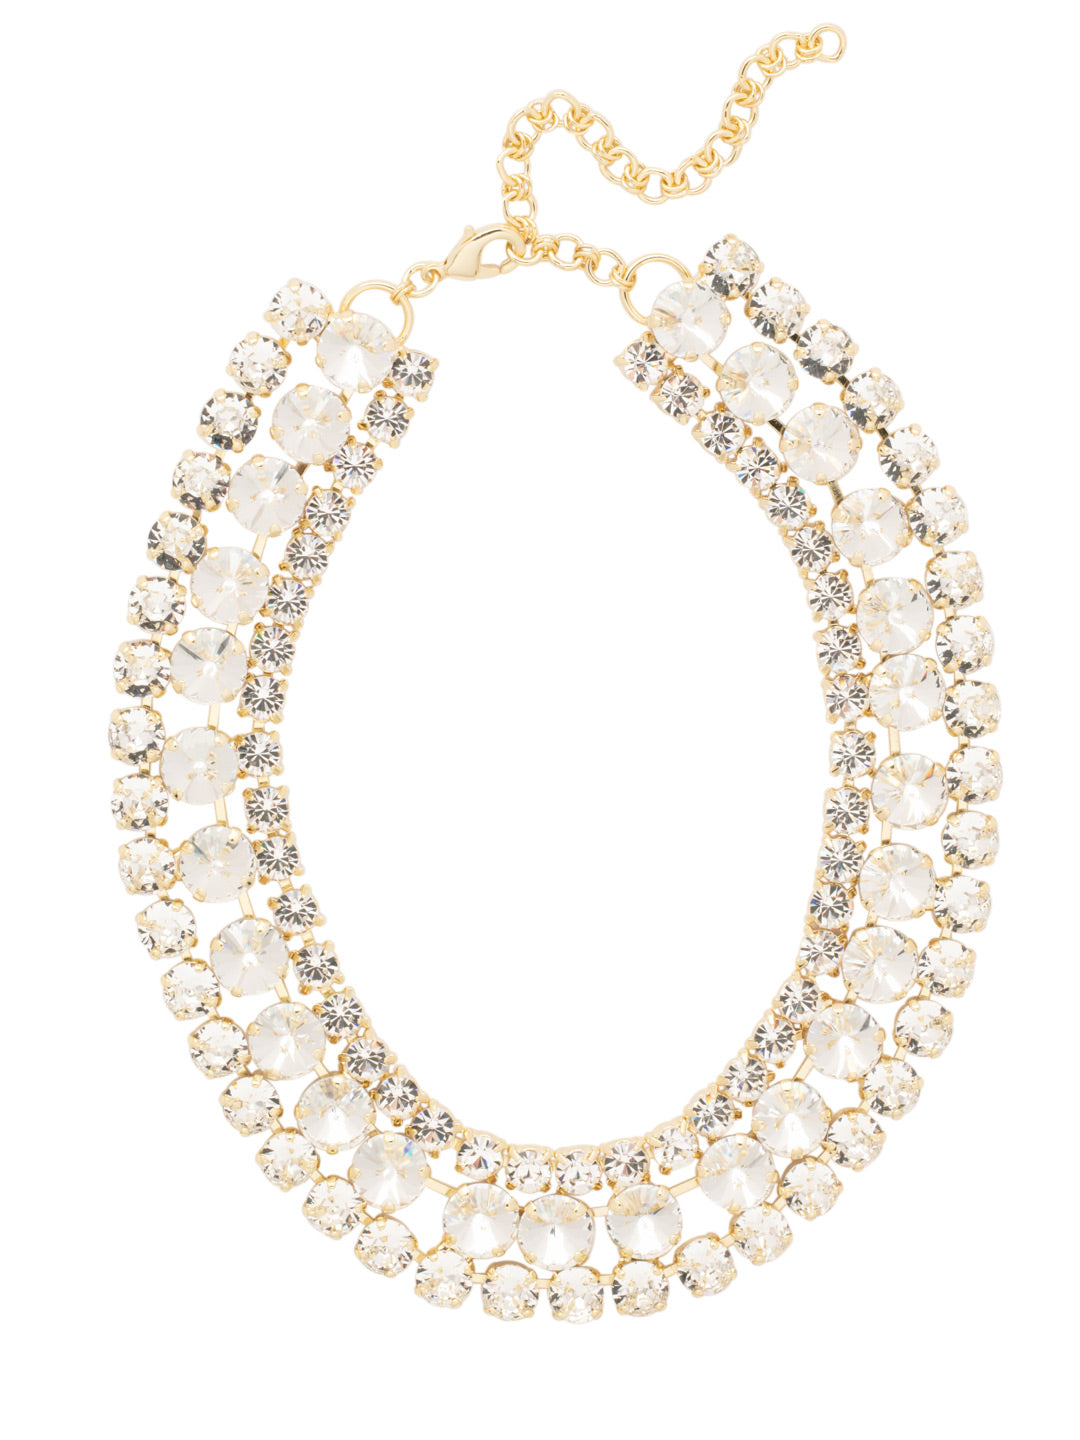 Sloane Layered Statement Necklace - NFL60BGCRY - <p>The Sloane Layered Statement Necklace features three line necklaces layered as one, with various sizes and shapes of crystals. From Sorrelli's Crystal collection in our Bright Gold-tone finish.</p>